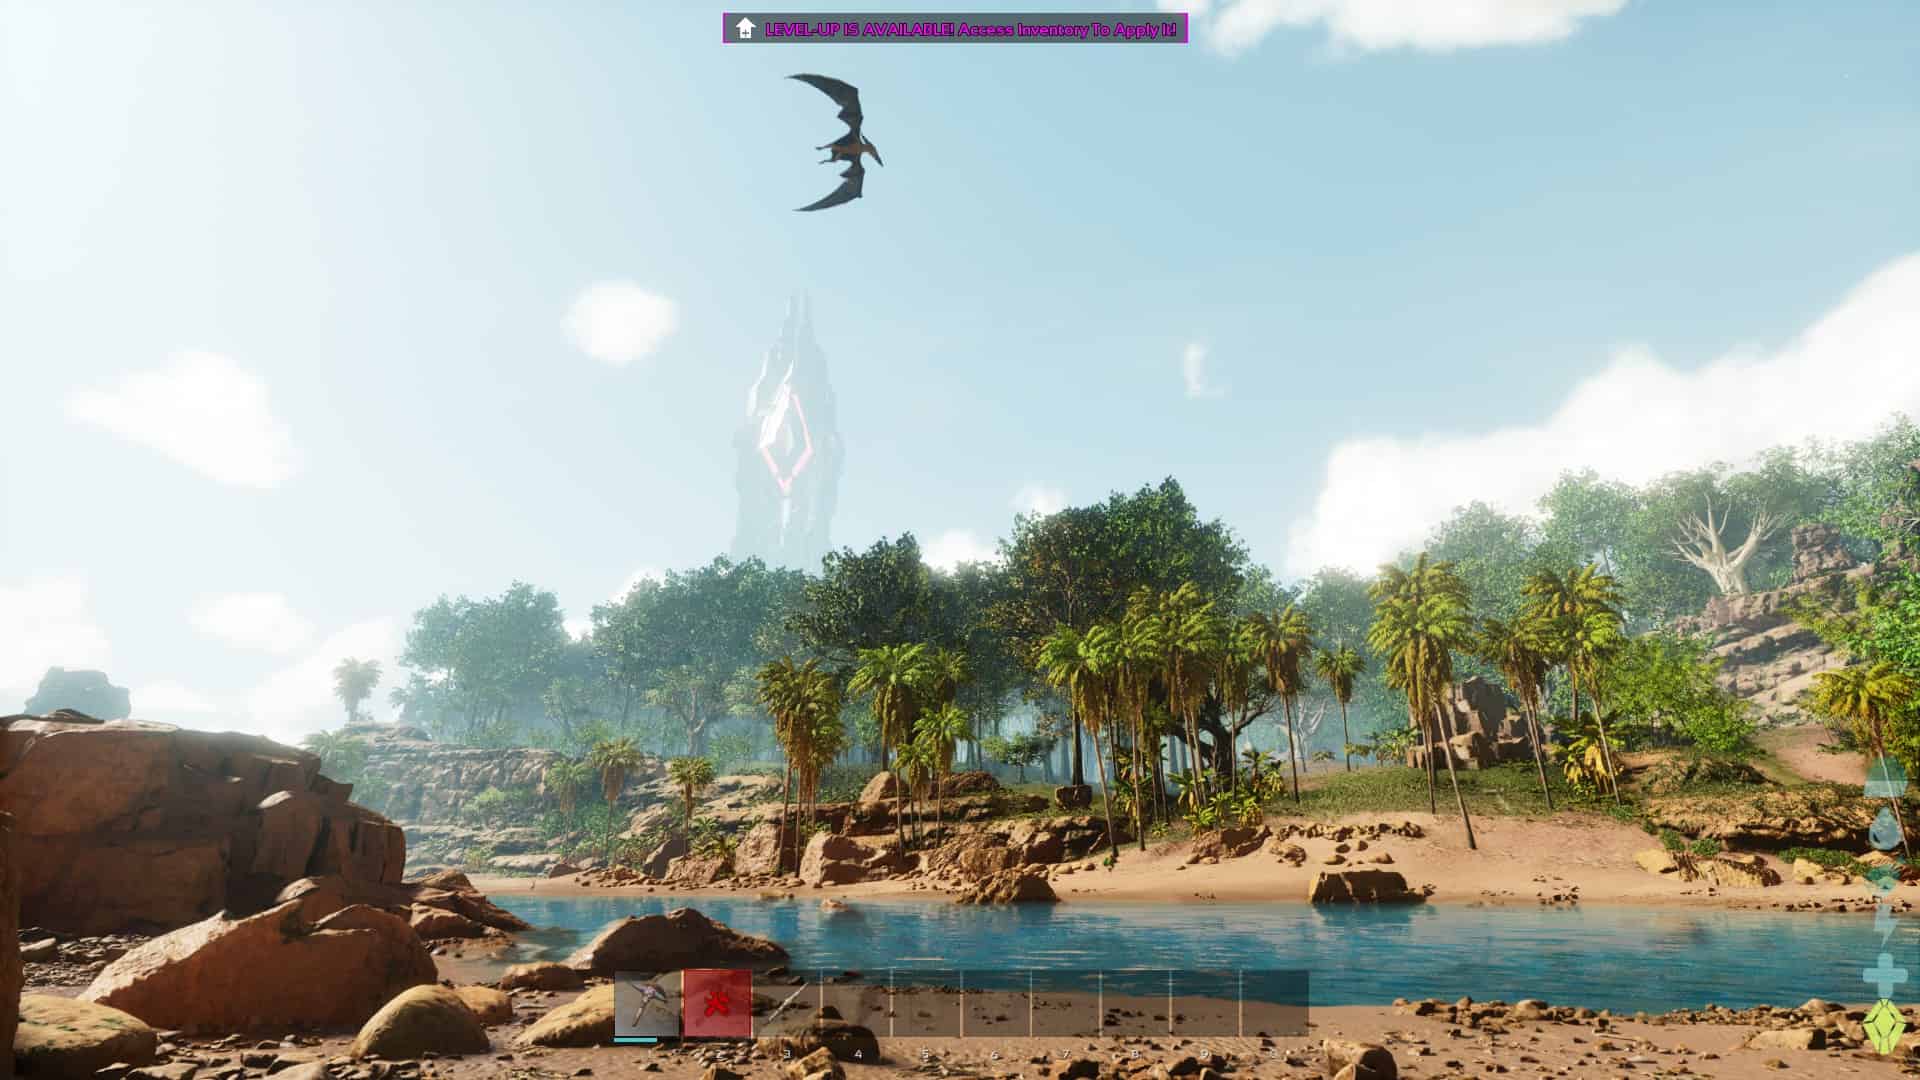 Is ARK Survival Ascended crossplay: A riverbank with a jungle on the other side while a Pterodactyl flies above.